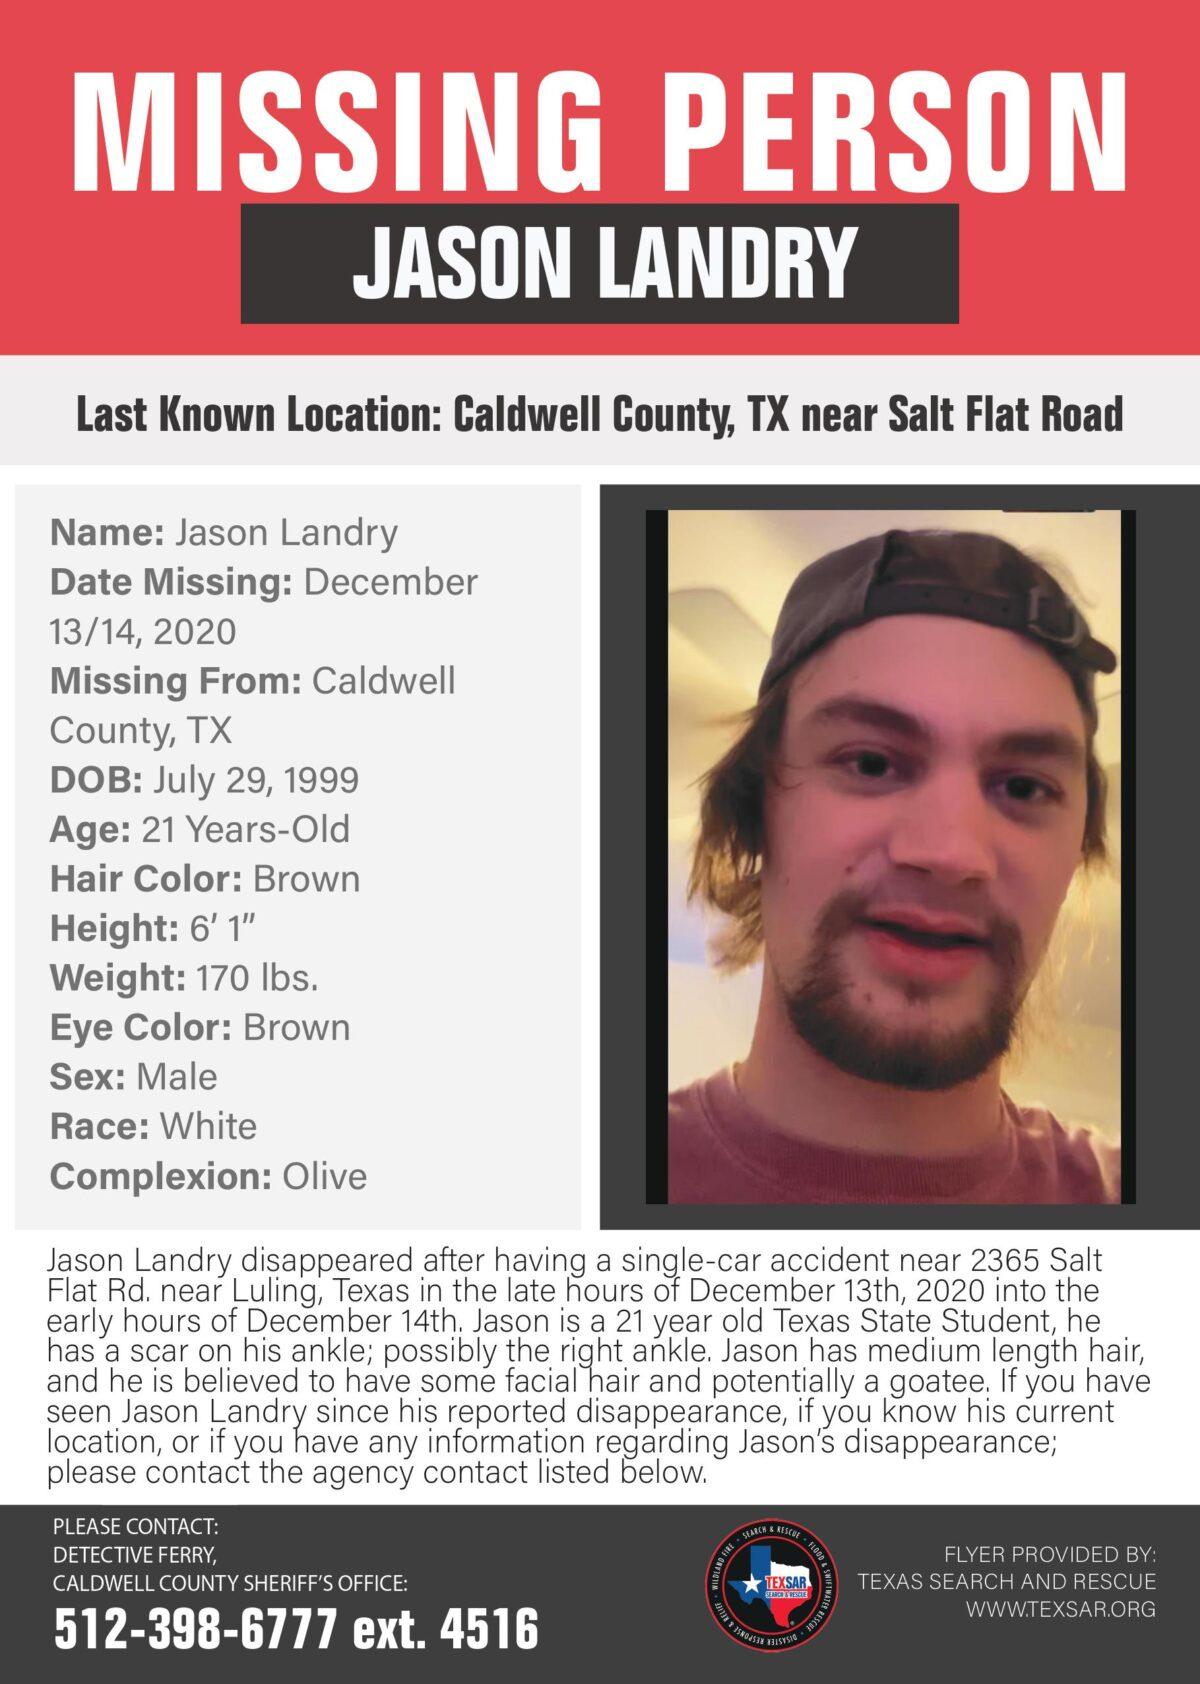 A Texas Search and Rescue flyer includes identifying details for missing college student Jason Landry and the facts of his disappearance in December 2020. (Courtesy of the Caldwell County Sheriff’s Office)